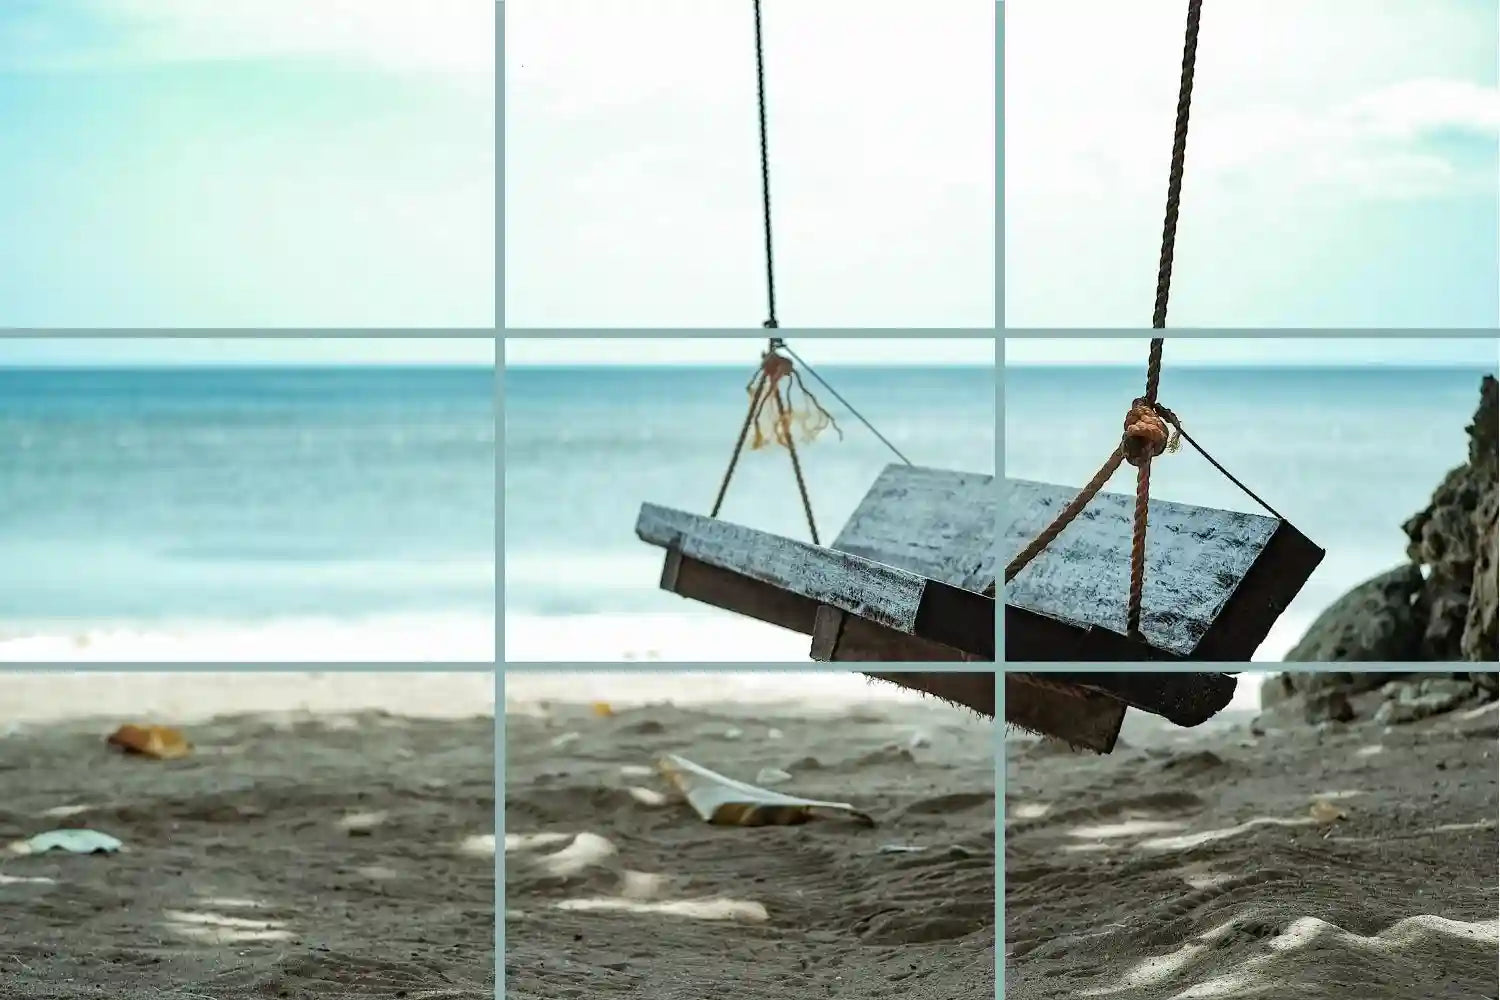 A wooden swing suspended on the beach